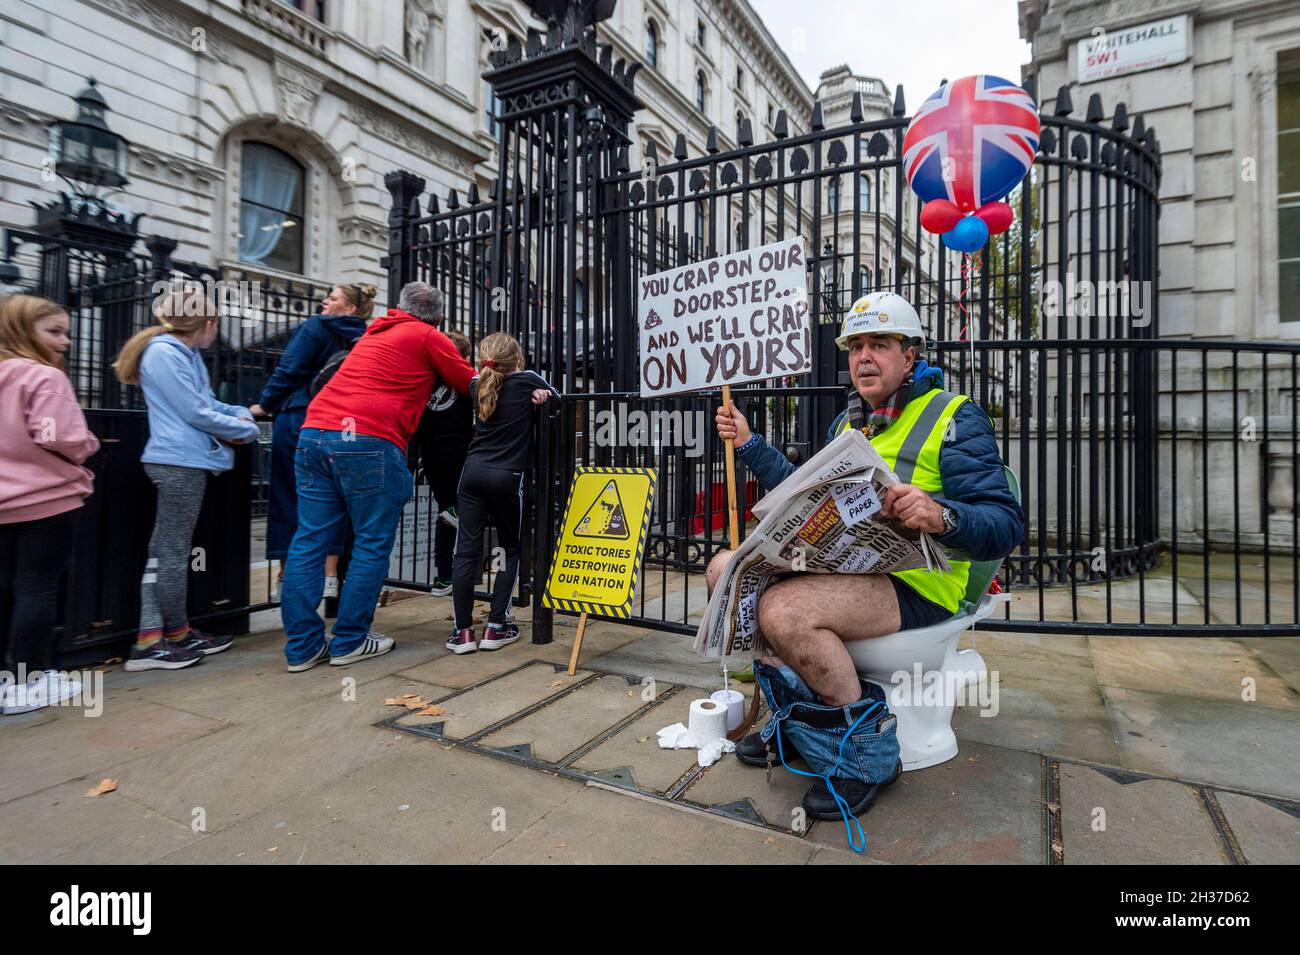 London, UK.  26 October 2021.  Steve Bray, well known anti-Brexit campaigner, stages a protest outside Downing Street whilst seated on a toilet, bringing attention to the impact of untreated sewage in the seas around the UK and on the environment.  His protest comes ahead of the upcoming UN Climate Change Conference of the Parties (COP26) taking place in Glasgow.  Credit: Stephen Chung / Alamy Live News Stock Photo